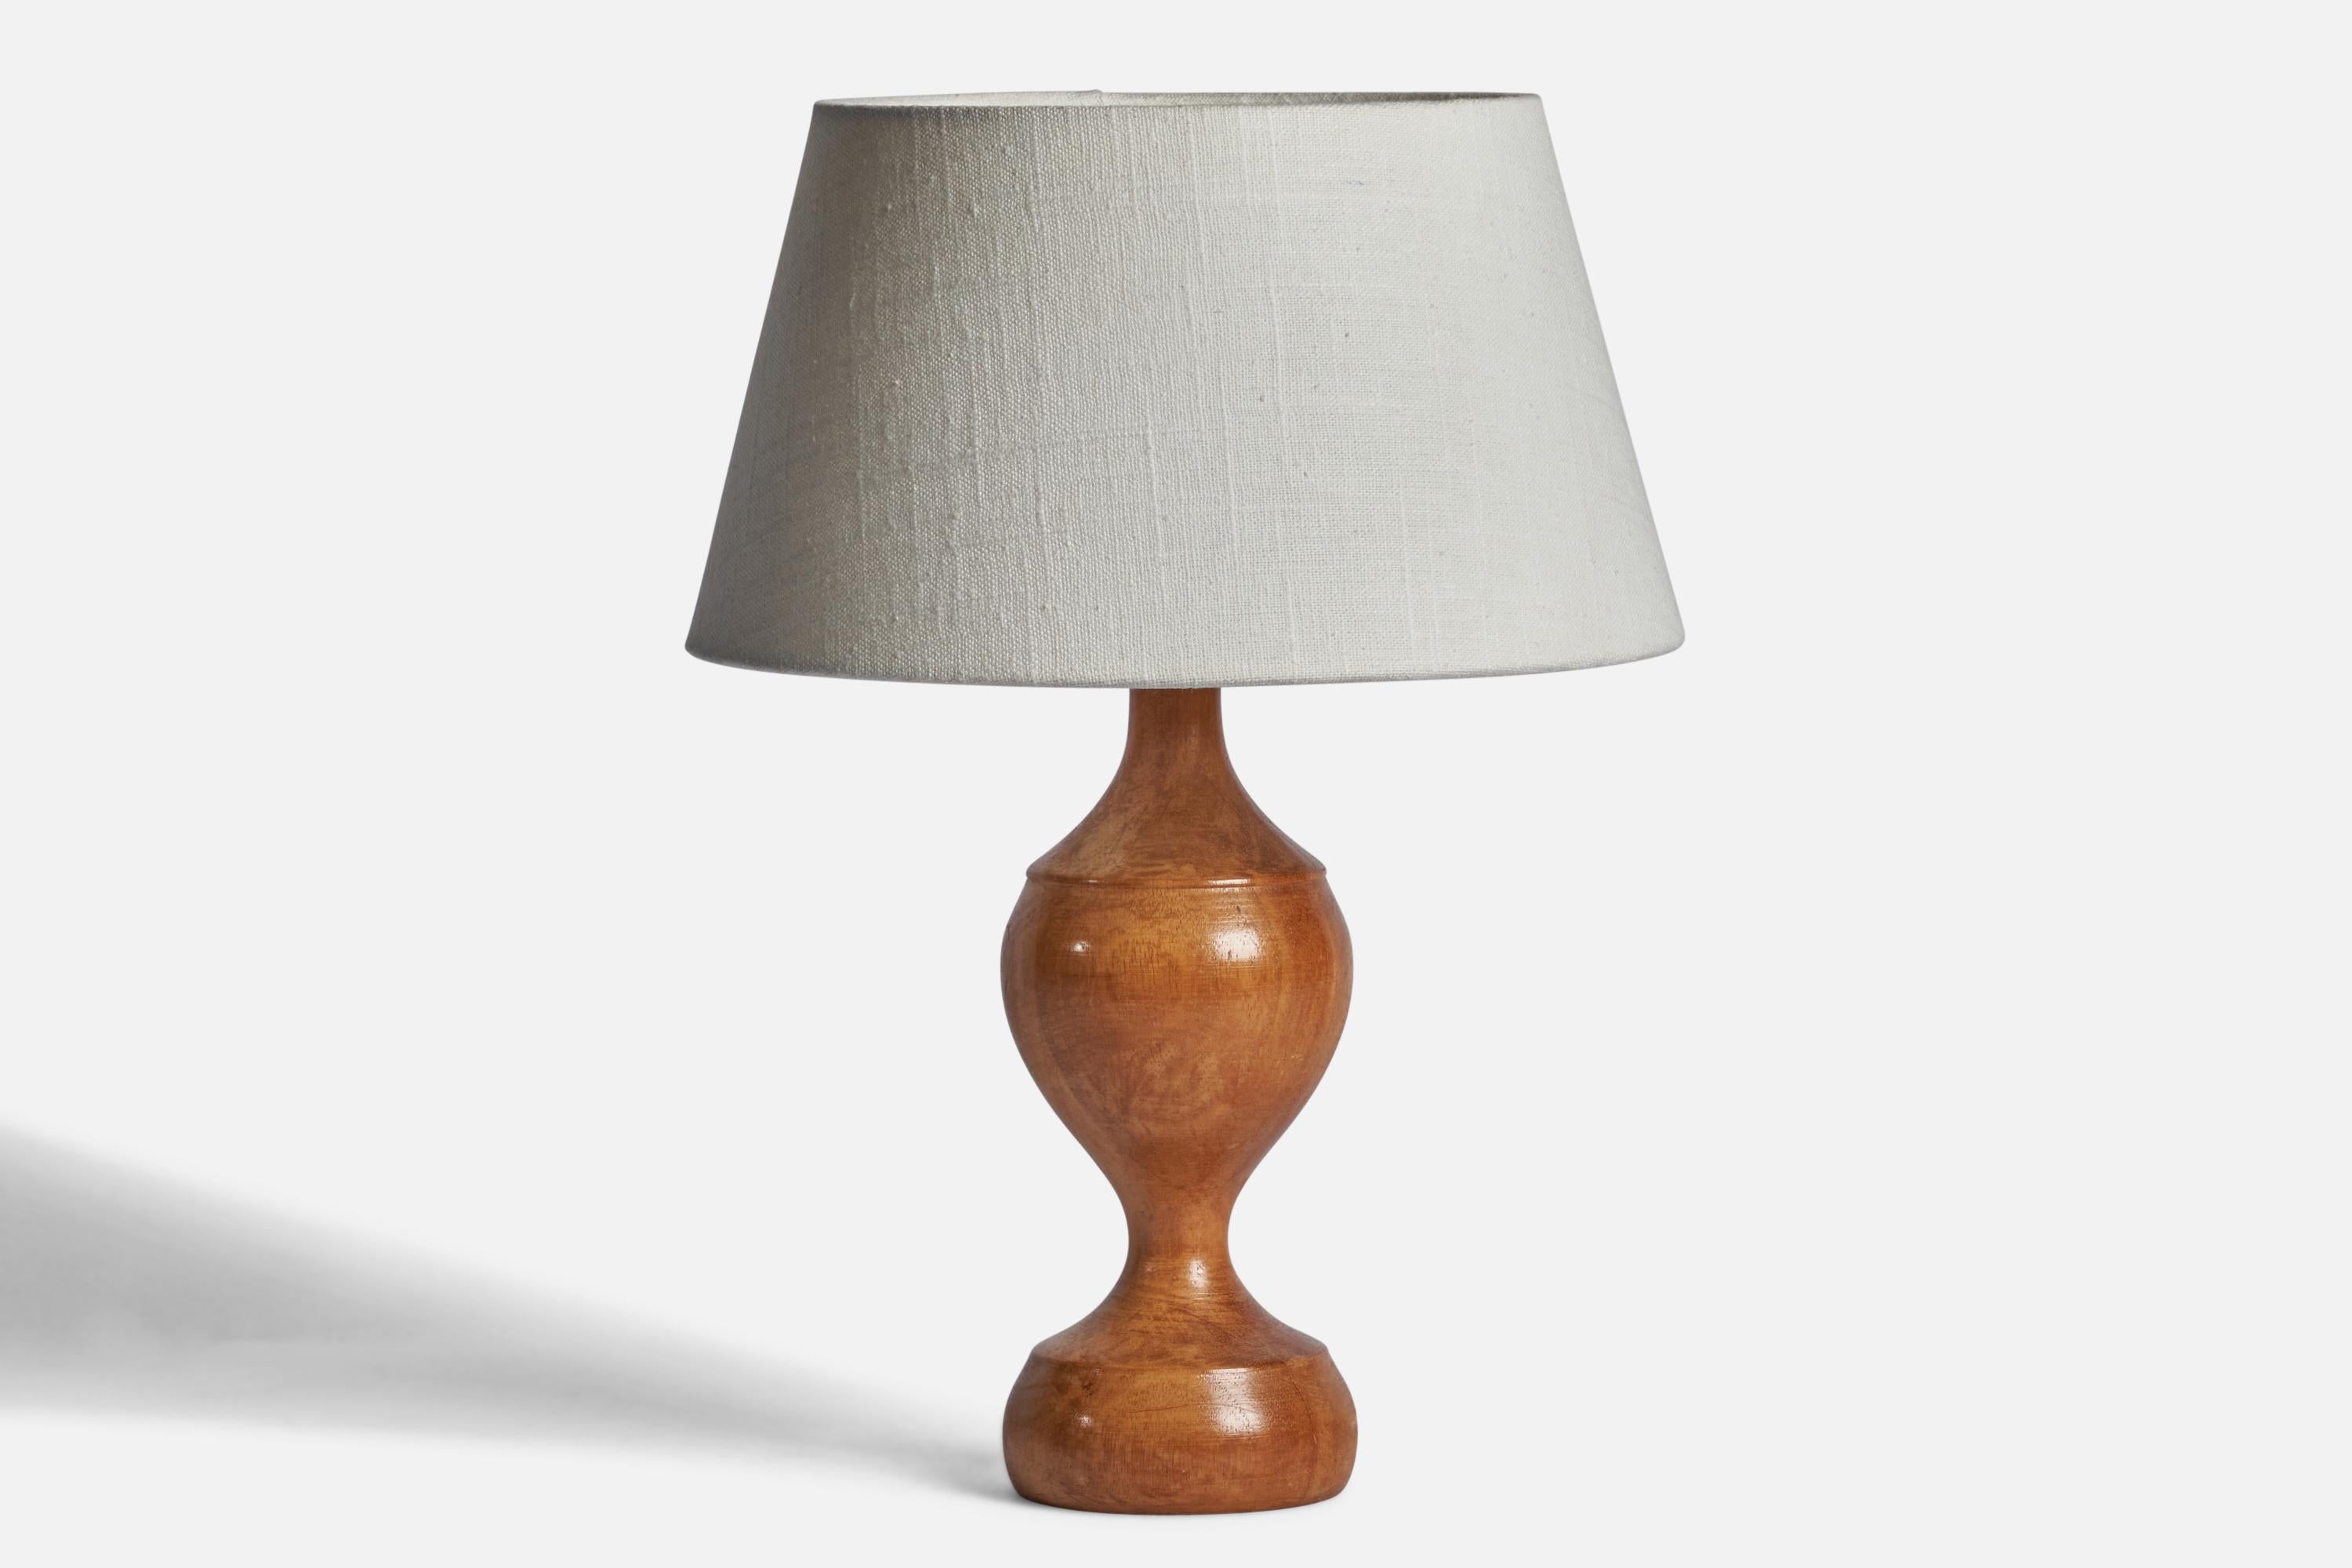 A birch table lamp designed and produced in Sweden, 1960s.

Dimensions of Lamp (inches): 11.35” H x 3.5” Diameter
Dimensions of Shade (inches): 7” Top Diameter x 10” Bottom Diameter x 5.5” H 
Dimensions of Lamp with Shade (inches): 14” H x